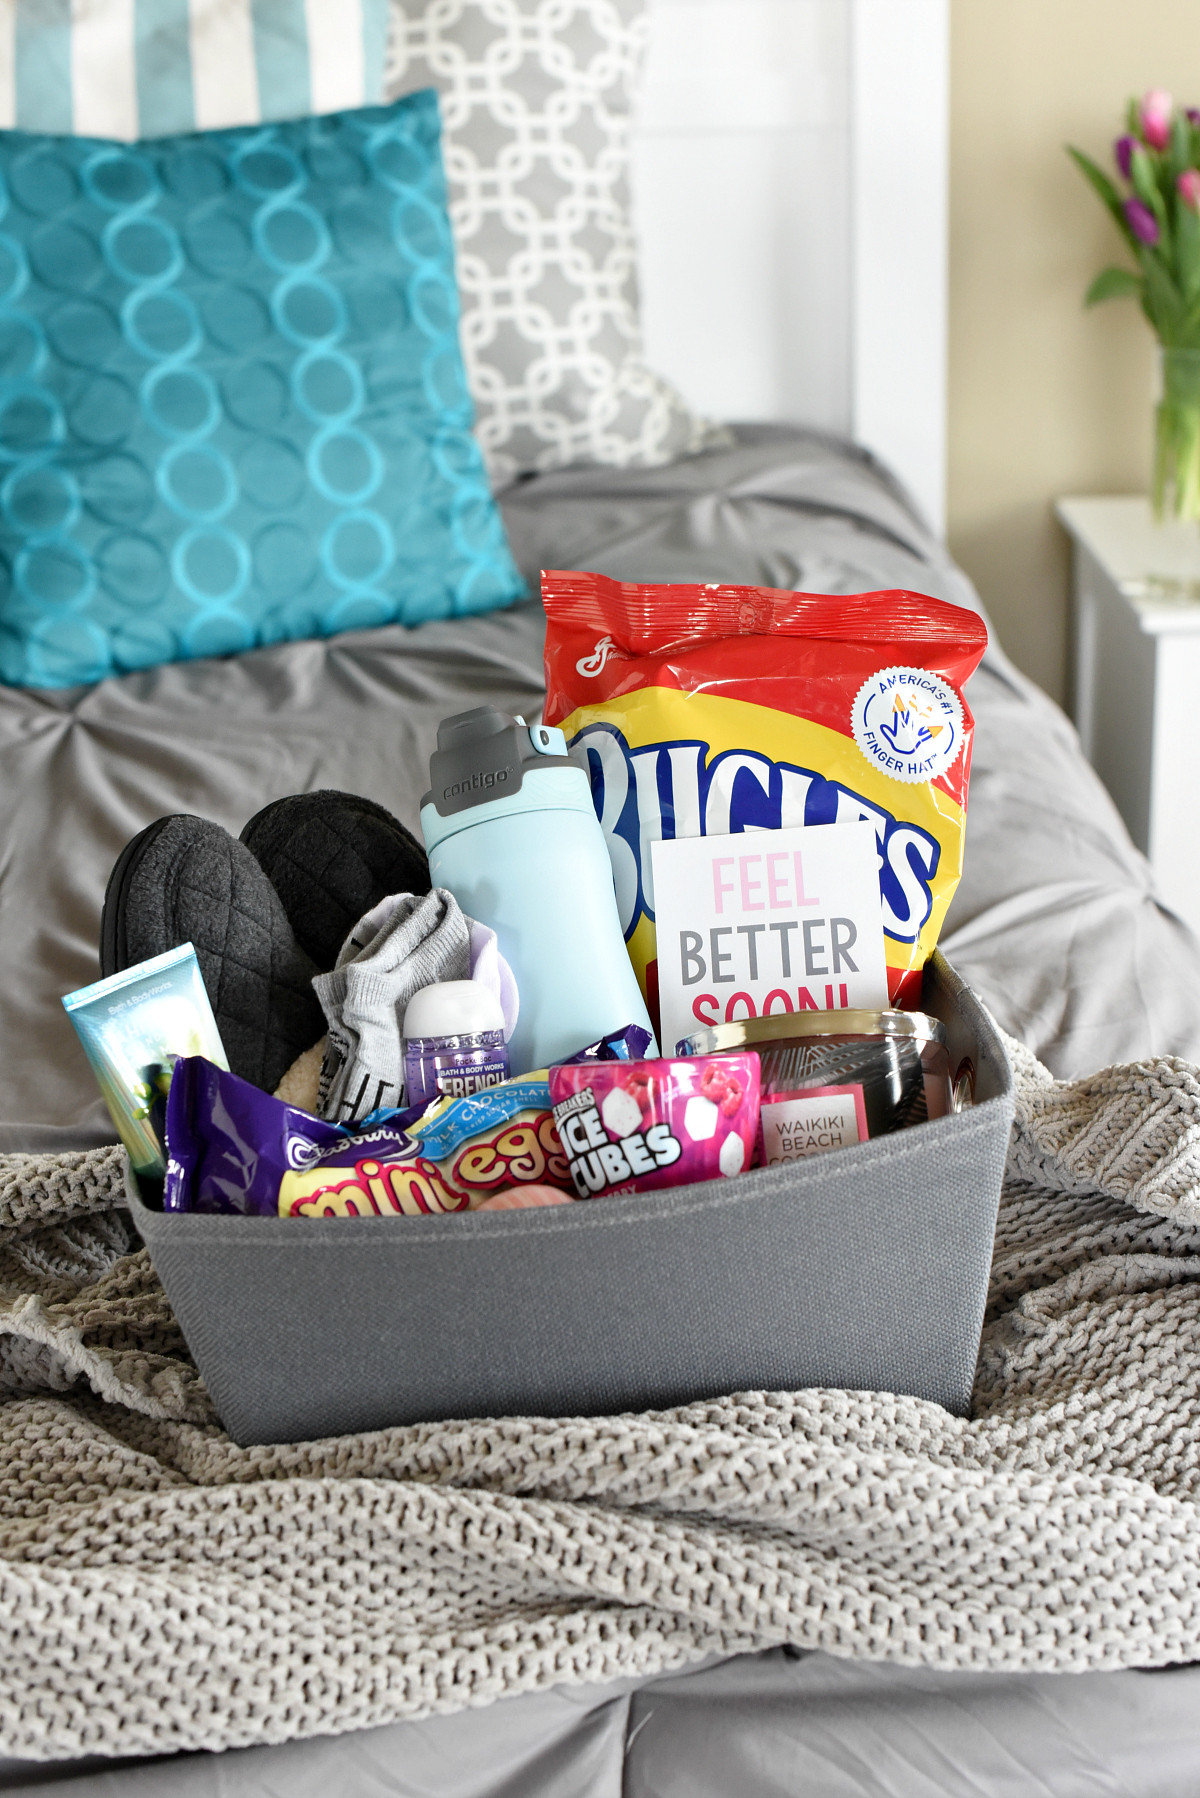 Get Well Soon Gift Basket Ideas
 Get Well Soon Gift Ideas – Fun Squared